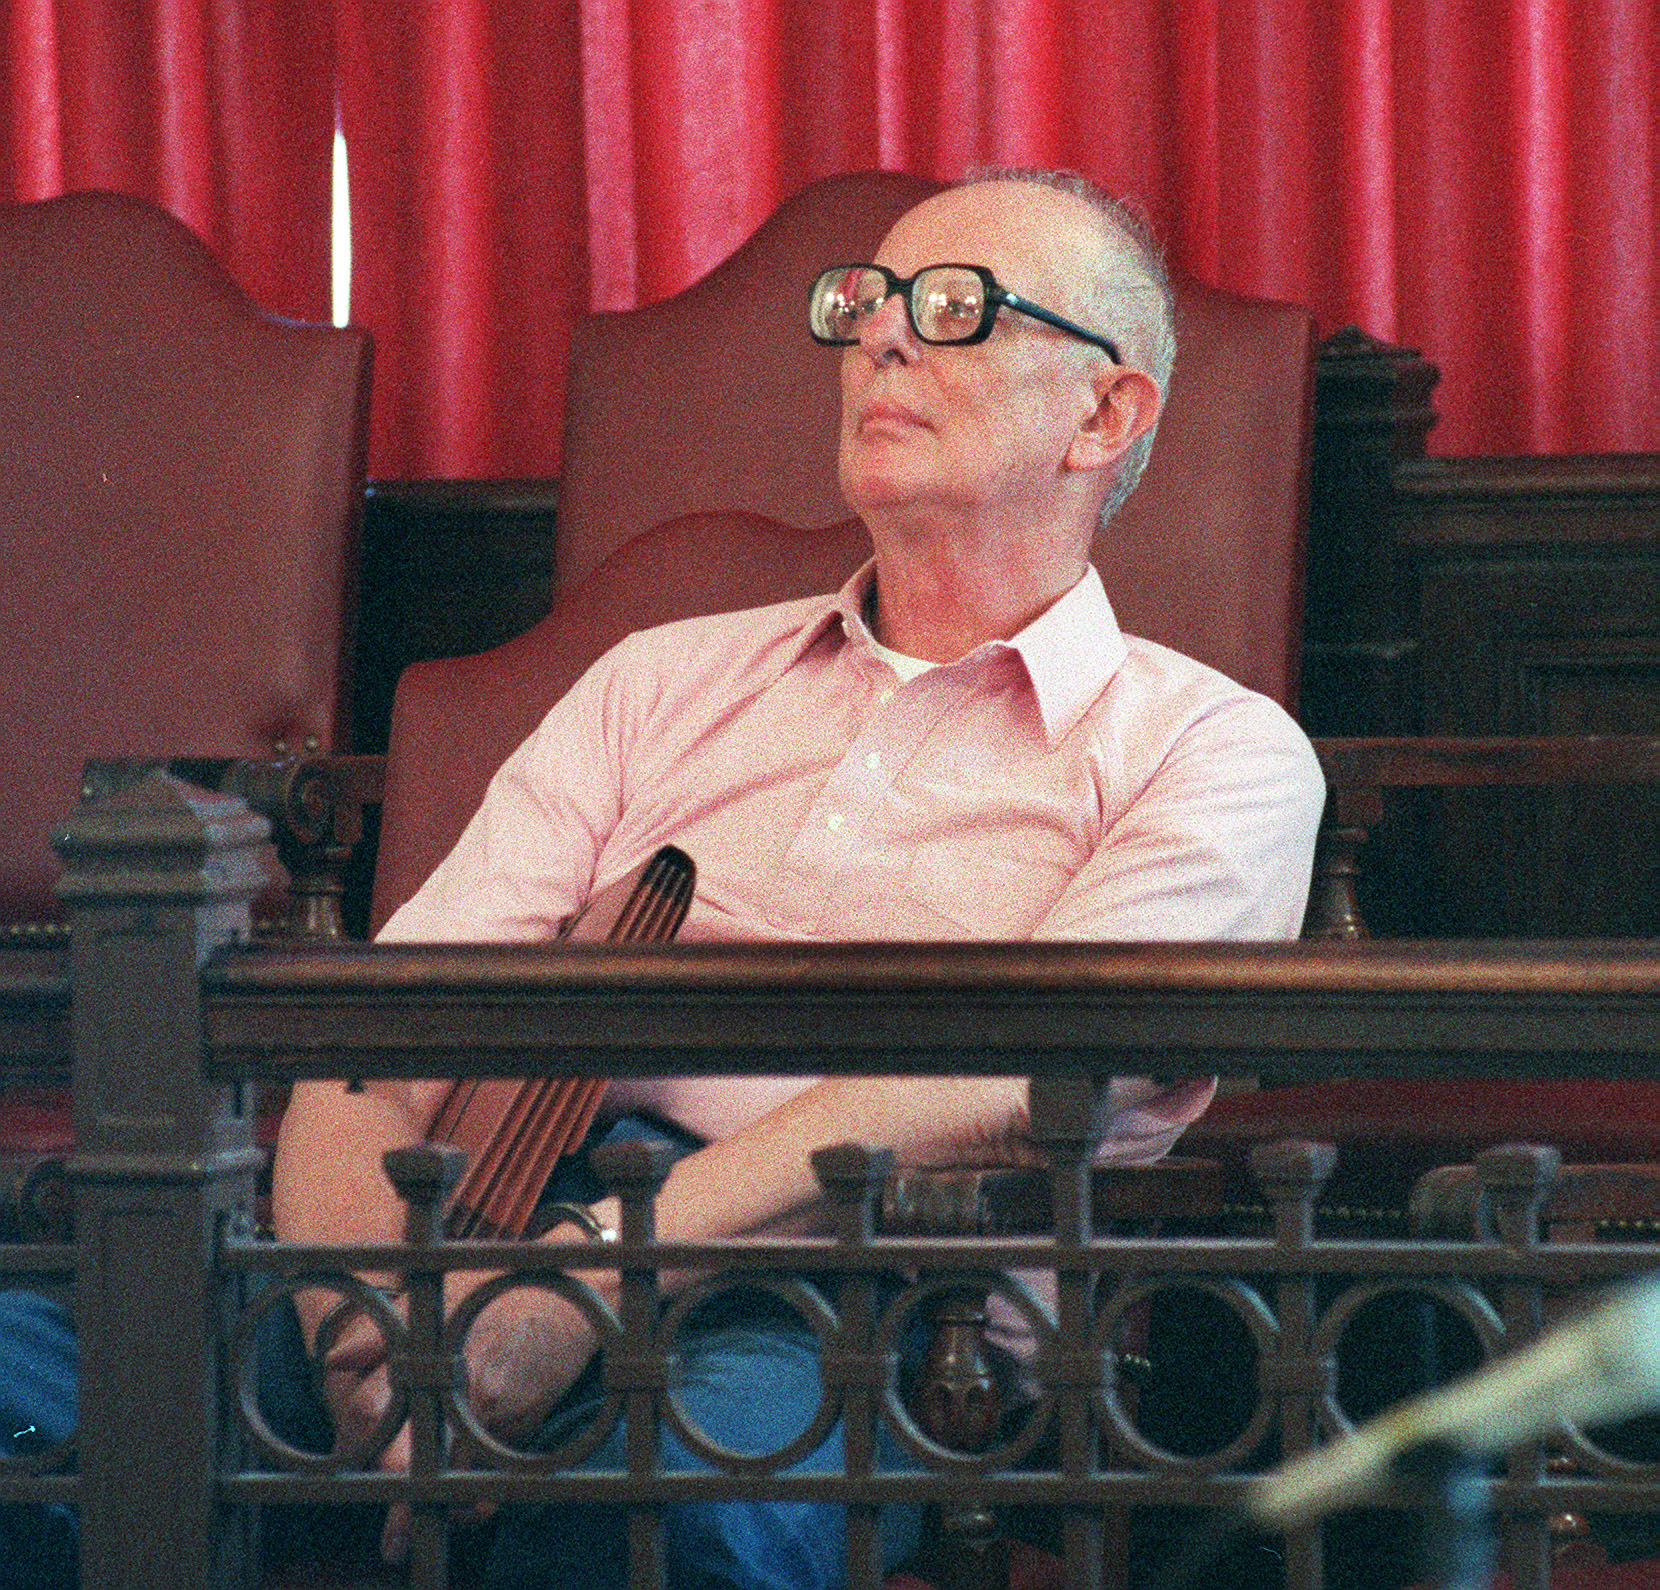 John List at his appeal hearing